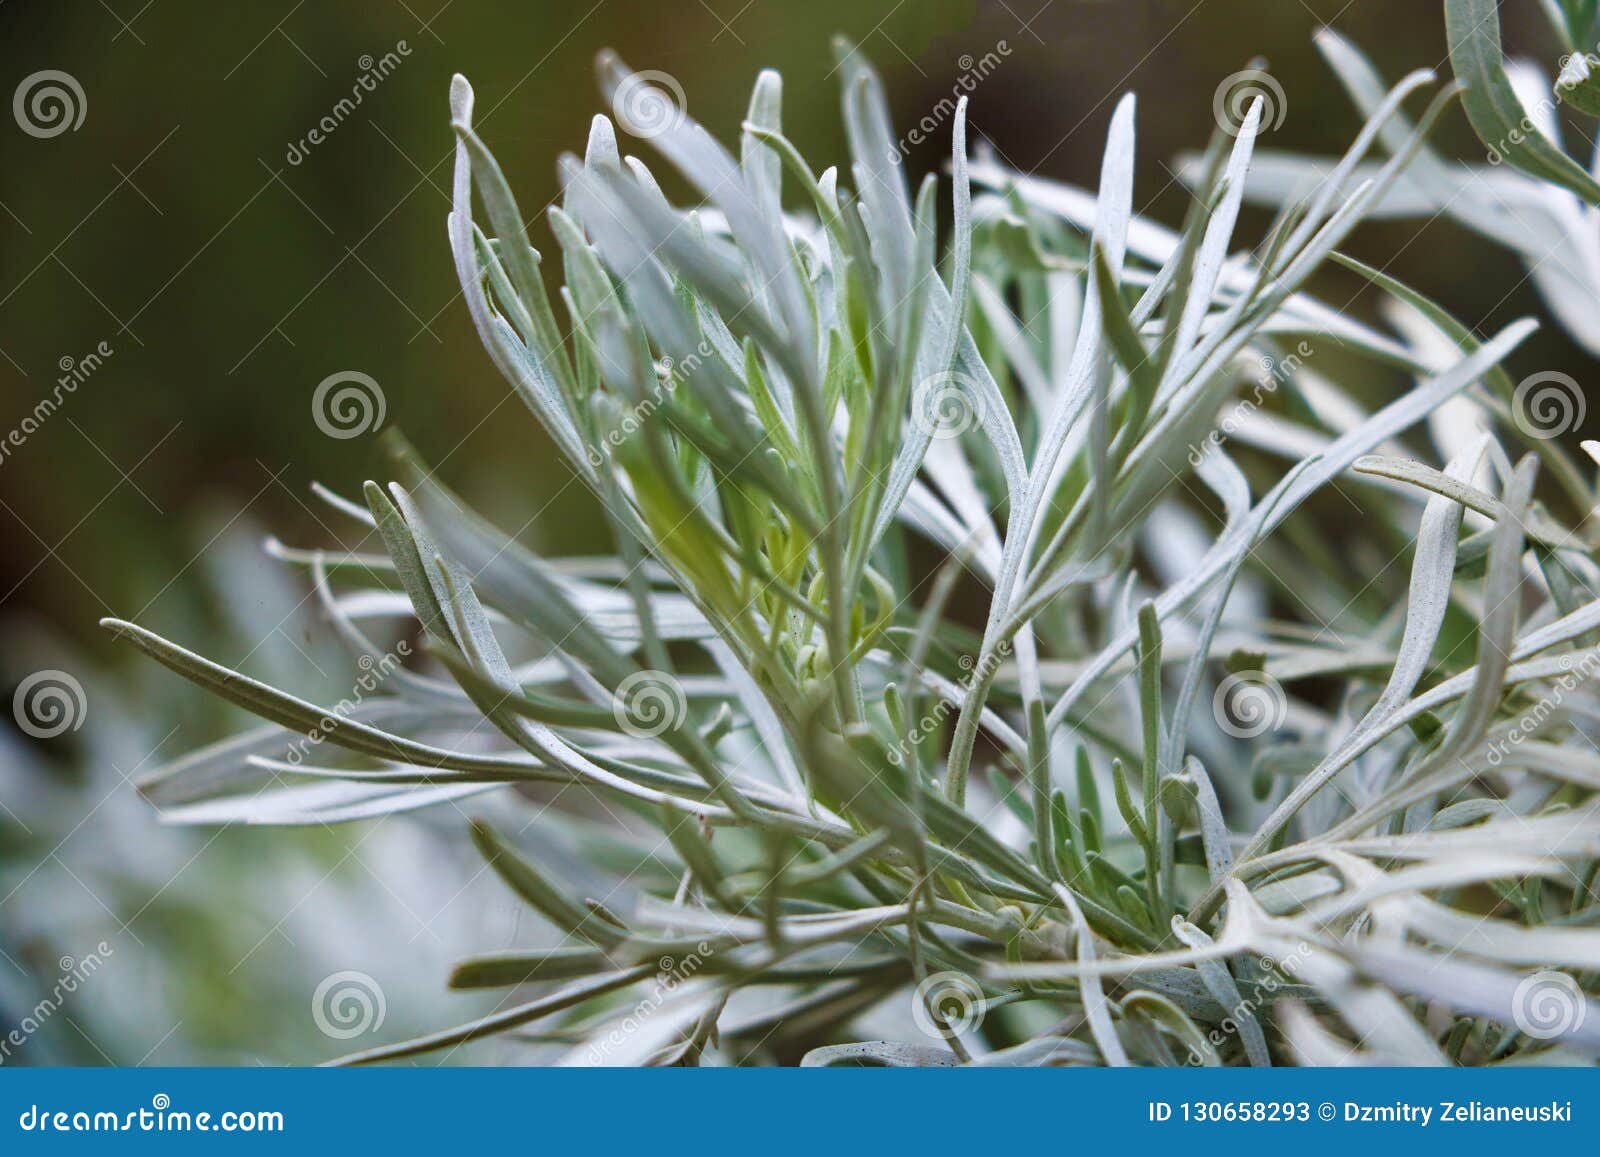 a large sheet dressing artemisia tridentata , commonly used in herbal medicine